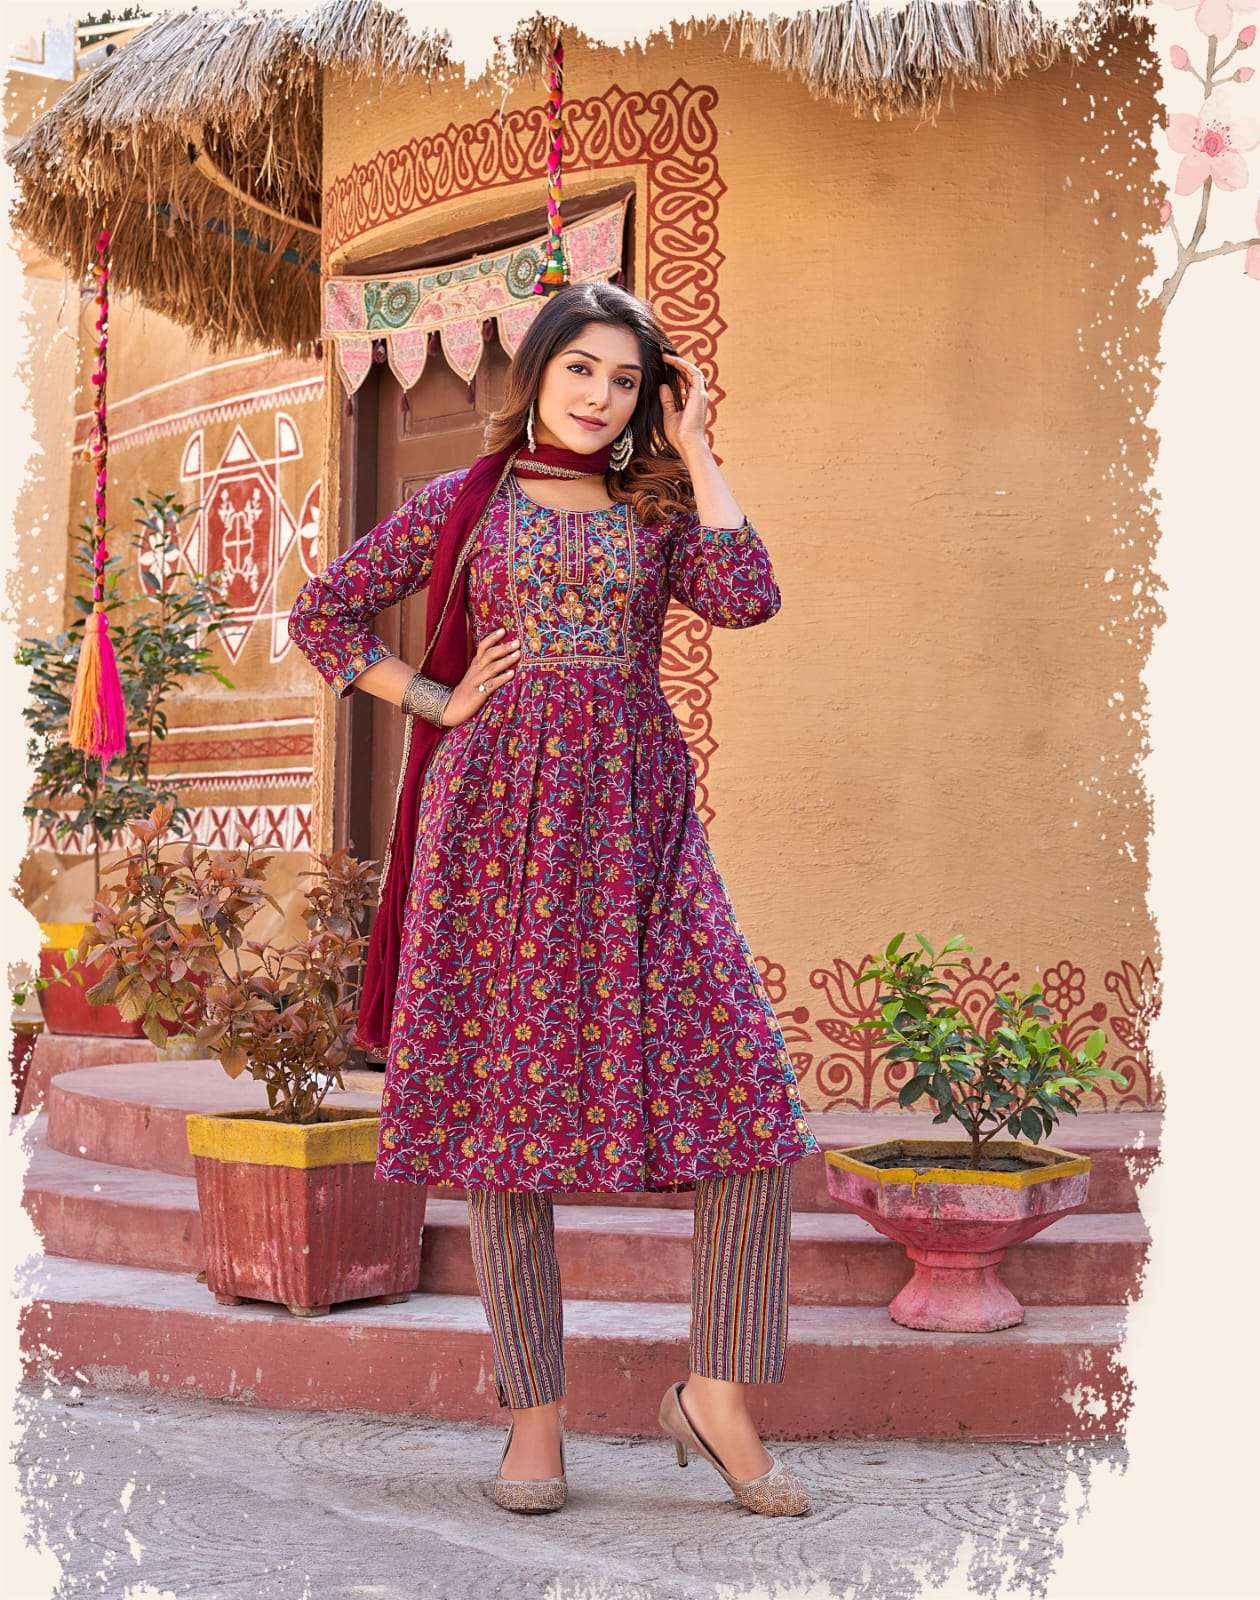 COTTON NYRA BY OSSM 01 TO 06 SERIES BEAUTIFUL STYLISH SUITS FANCY COLORFUL CASUAL WEAR & ETHNIC WEAR & READY TO WEAR COTTON PRINT DRESSES AT WHOLESALE PRICE